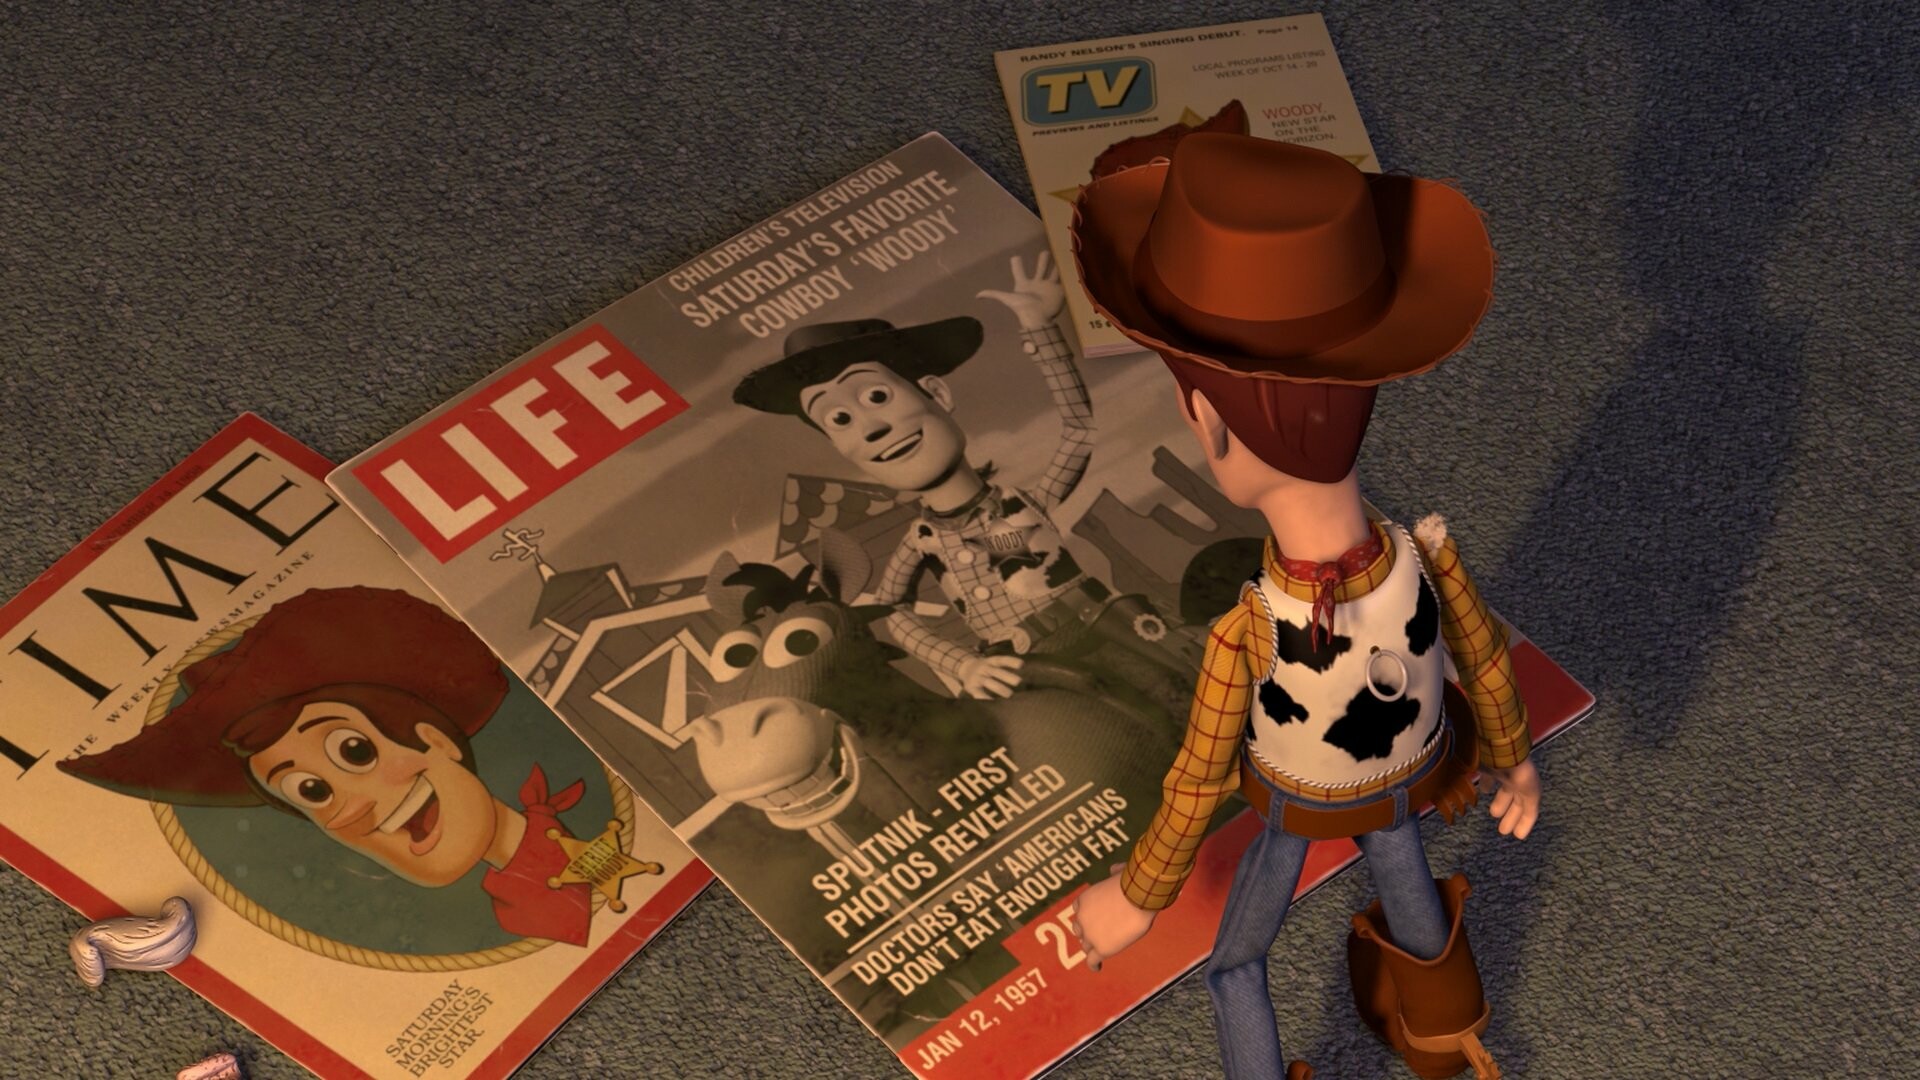 Toy Story: A screenplay written by Andrew Stanton, Rita Hsiao, Doug Chamberlin, and Chris Webb. 1920x1080 Full HD Wallpaper.